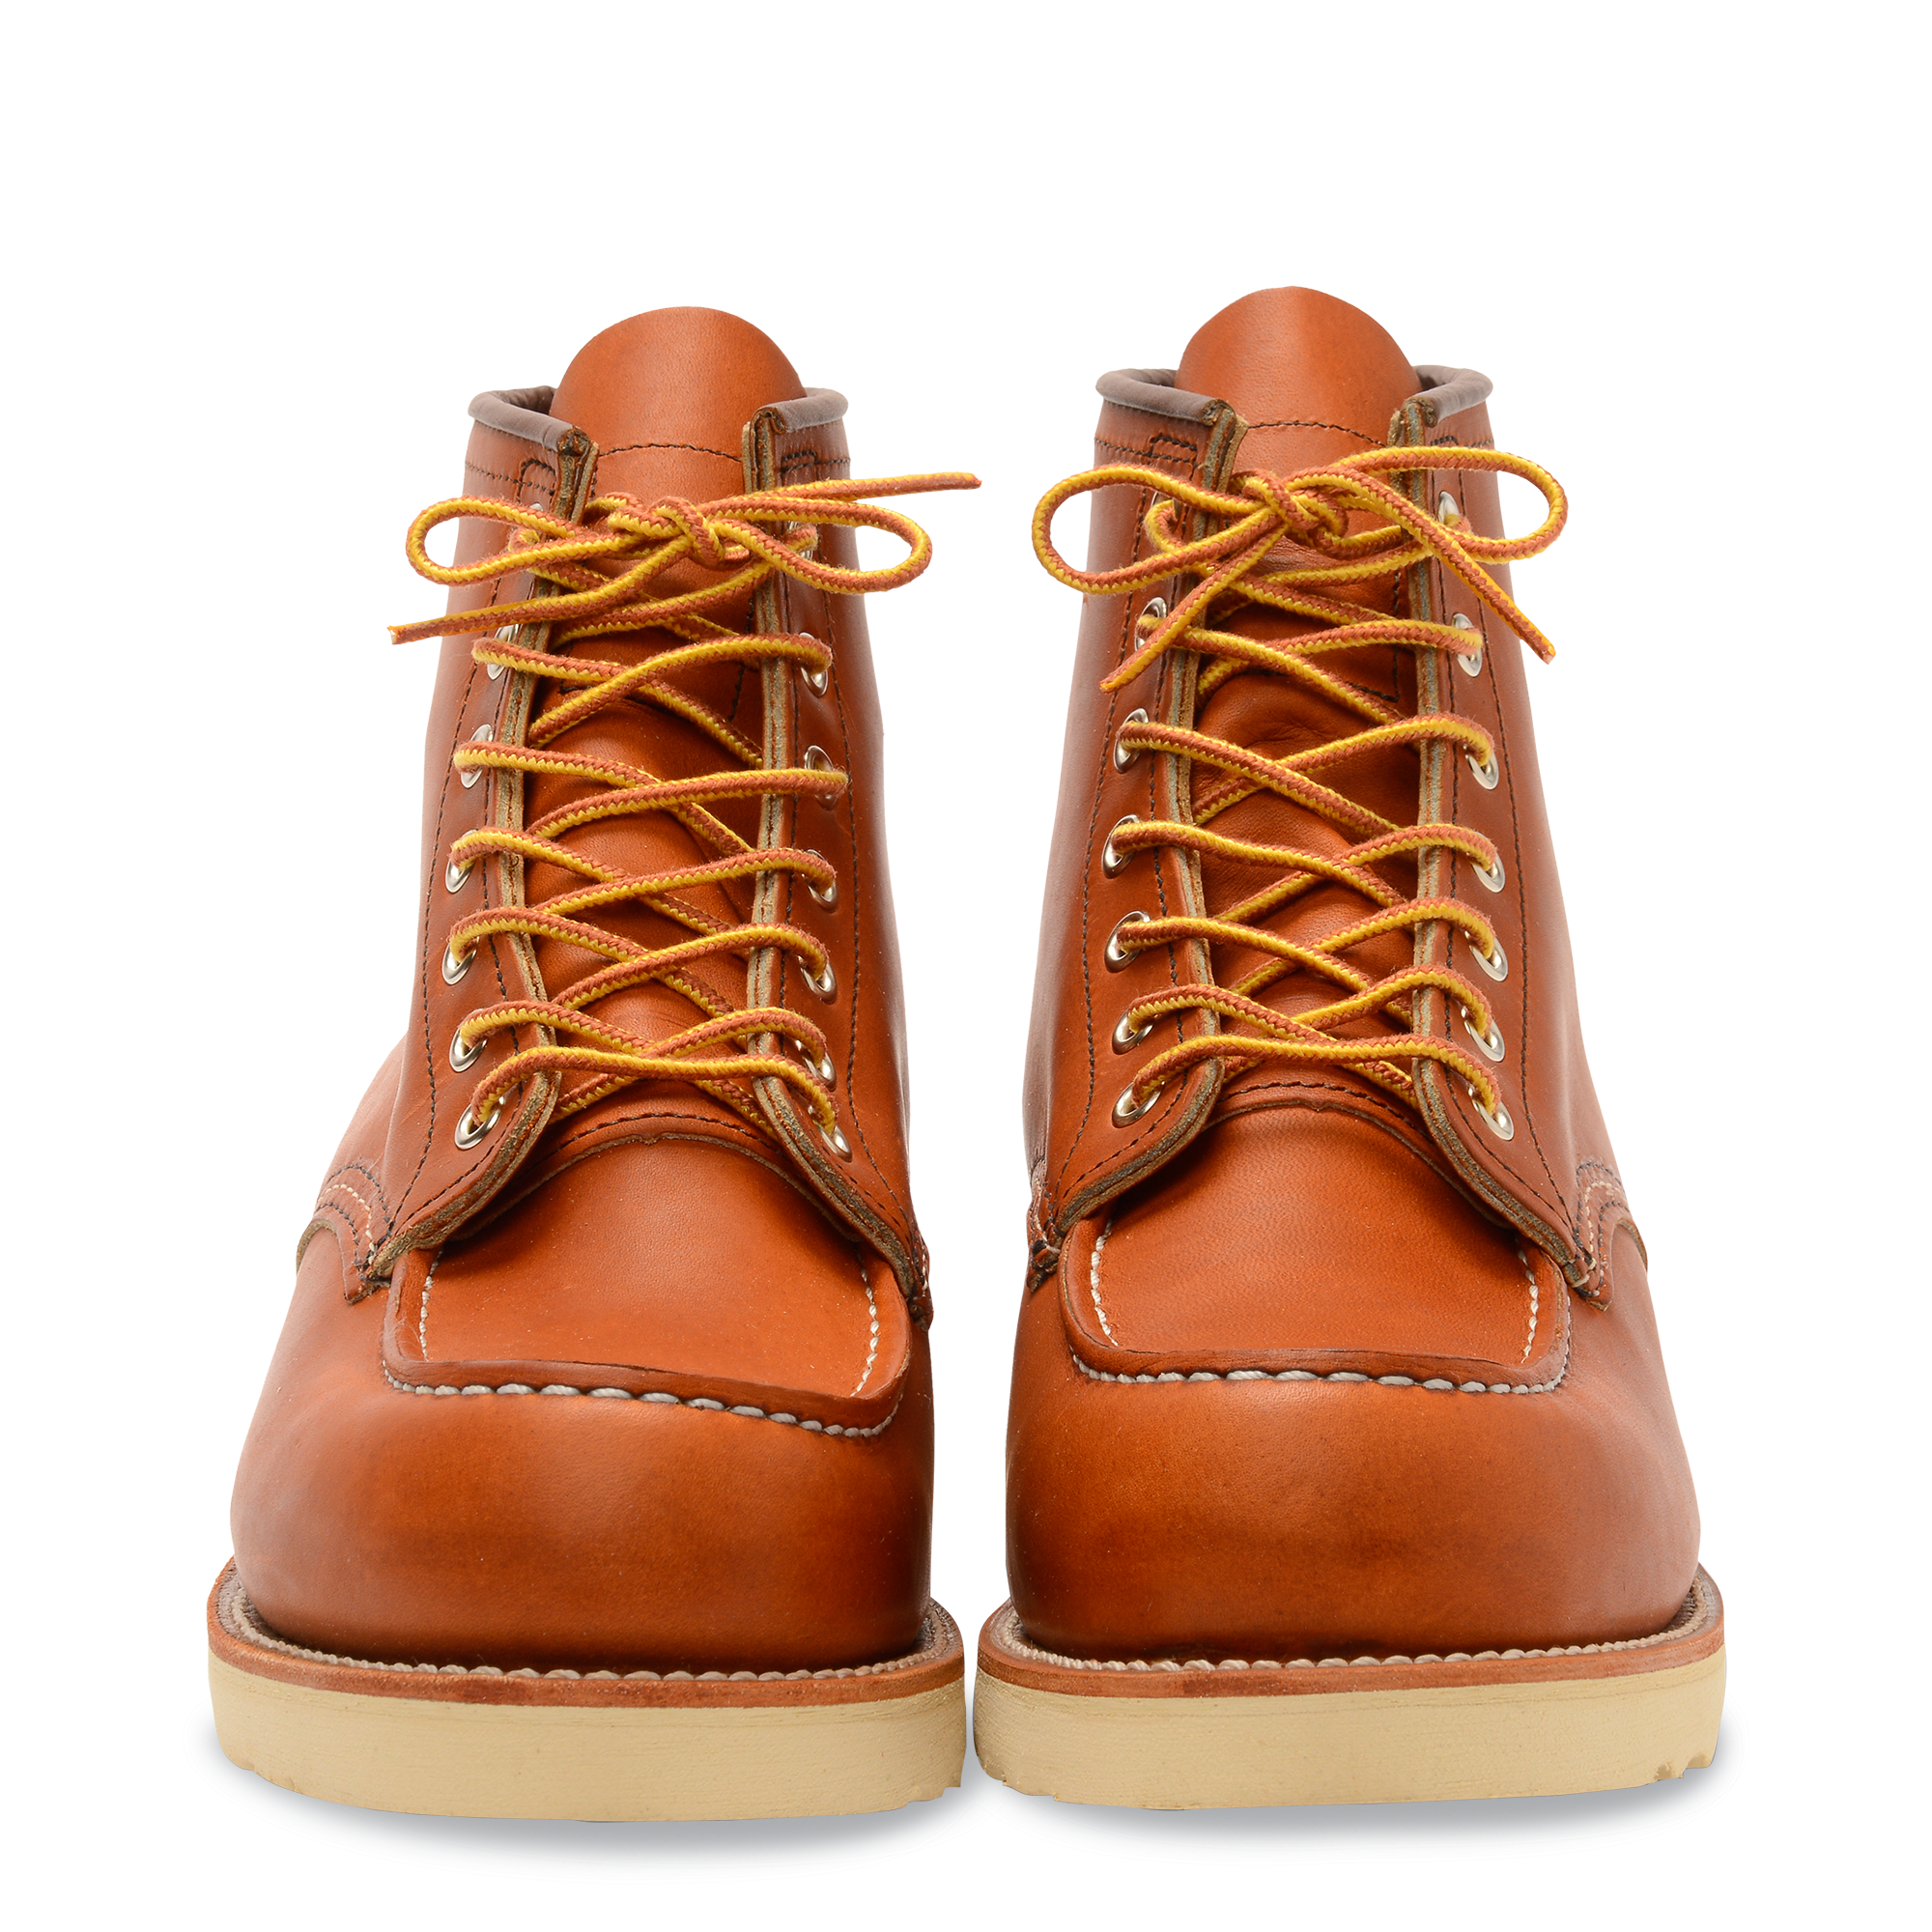 Marty Fielding efterår nyhed Red Wing Classic Moc Toe Boots 875 | Red Wing London London